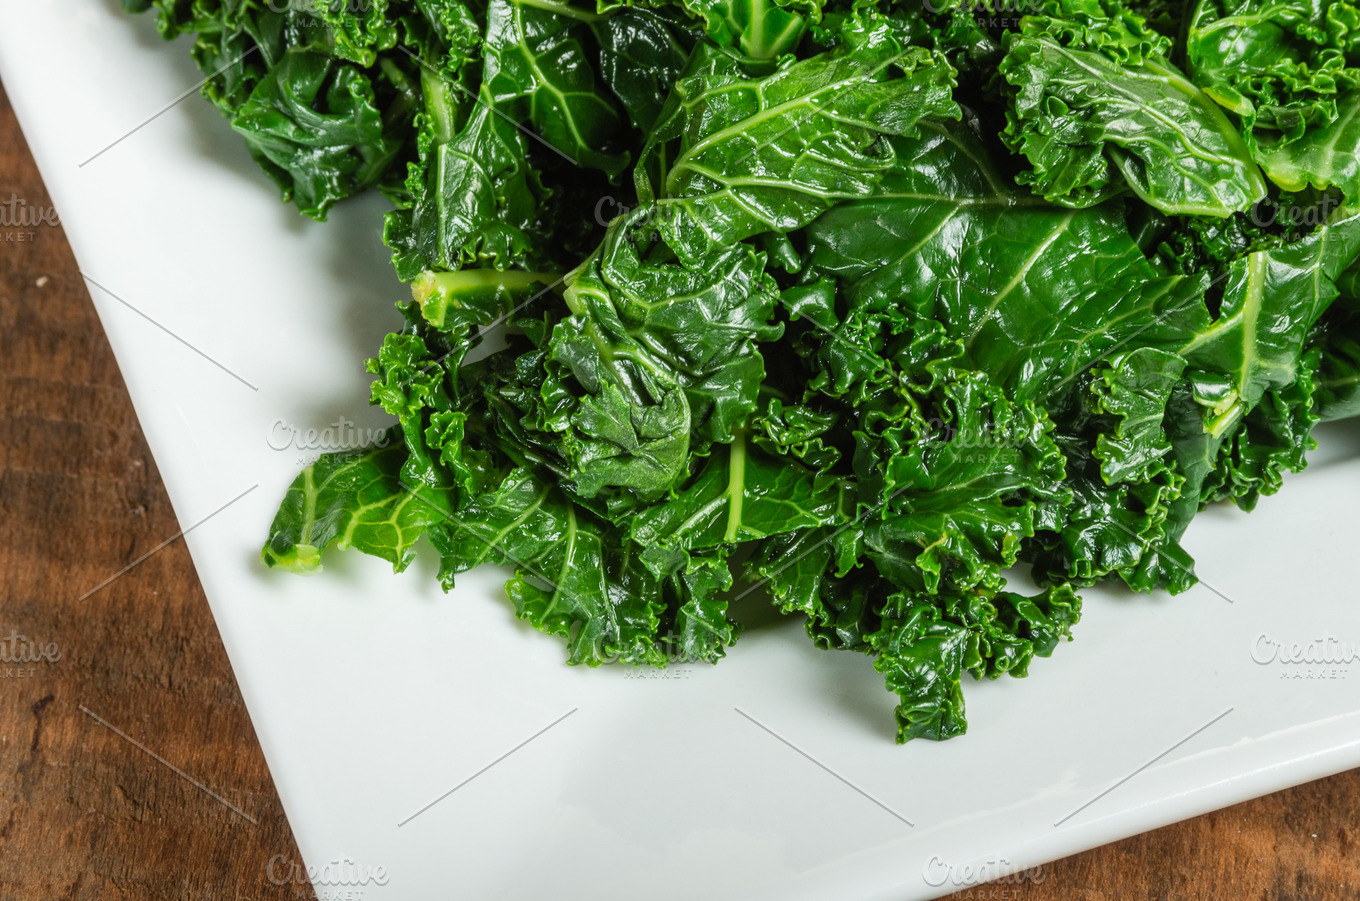 Fresh cooked kale | High-Quality Food Images ~ Creative Market